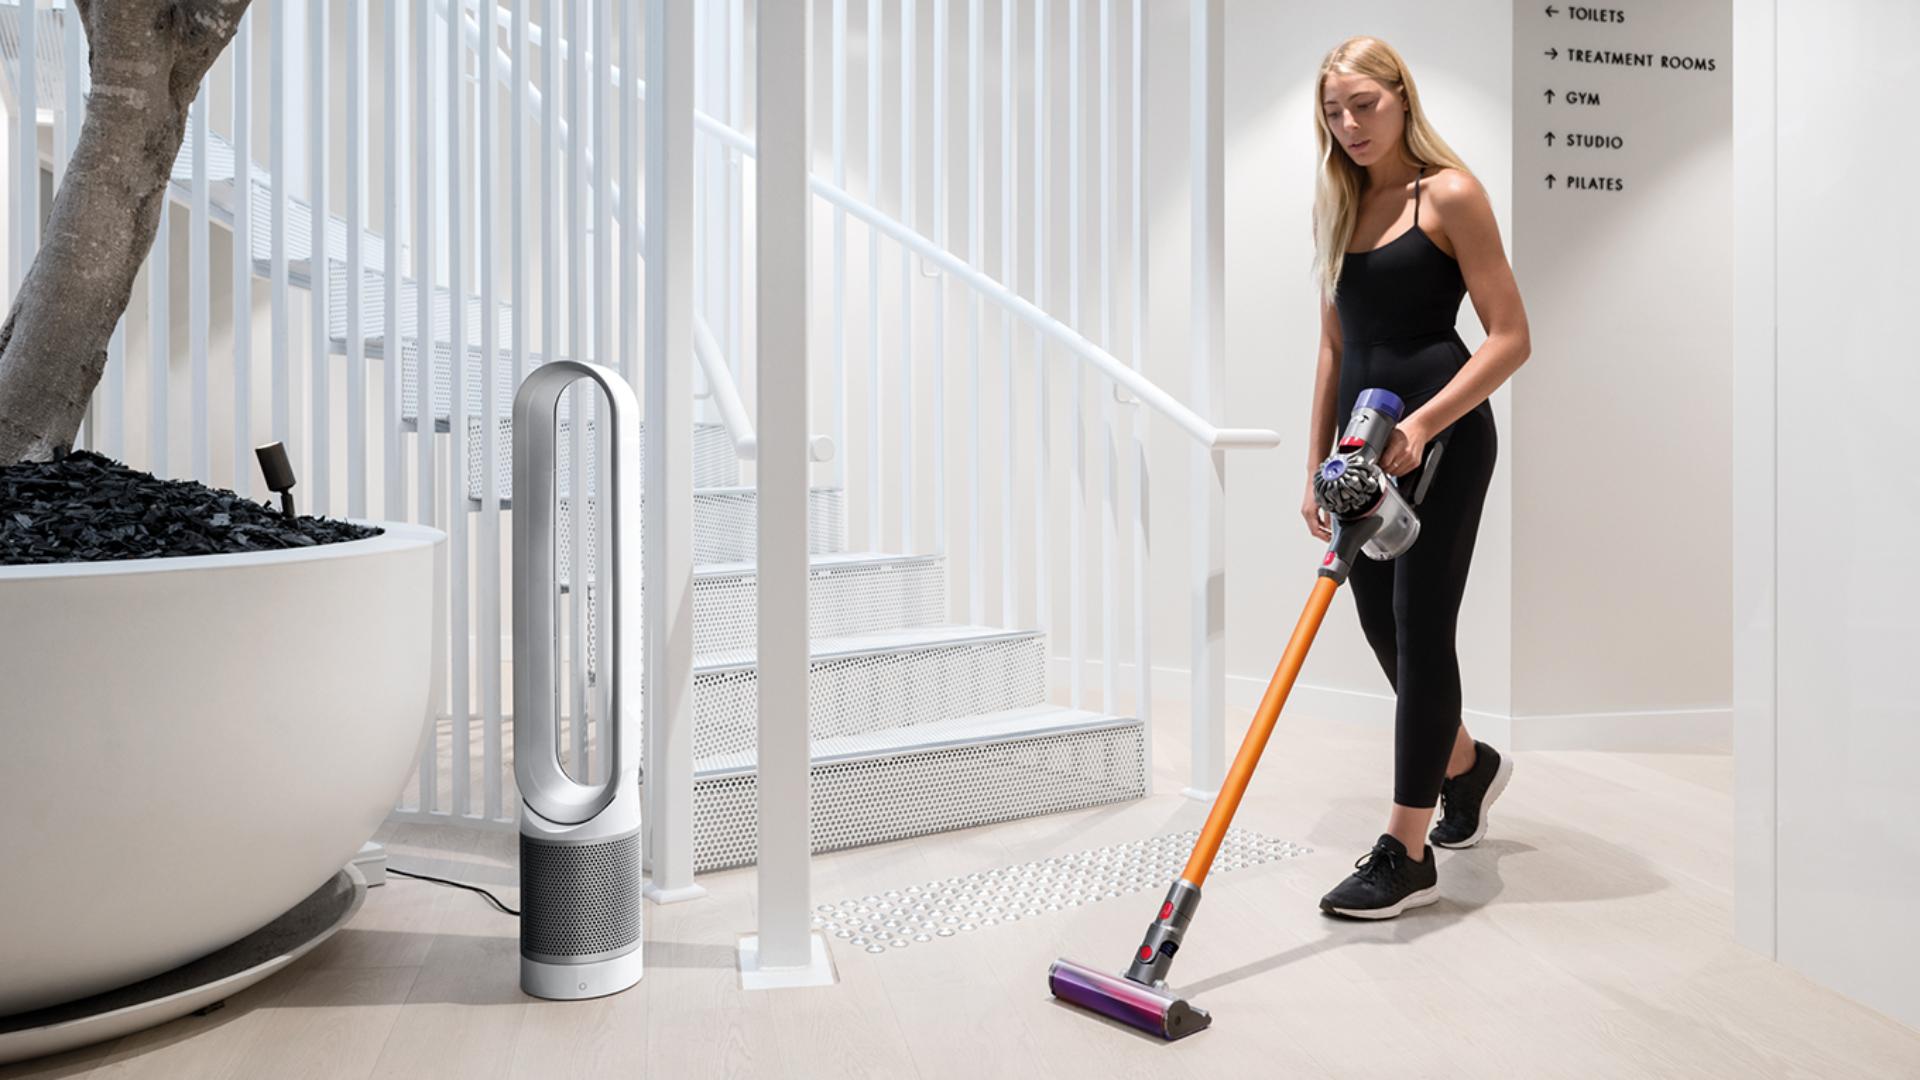 Lady cleaning The Well's floors with a Dyson V8™ by a Dyson purifier 